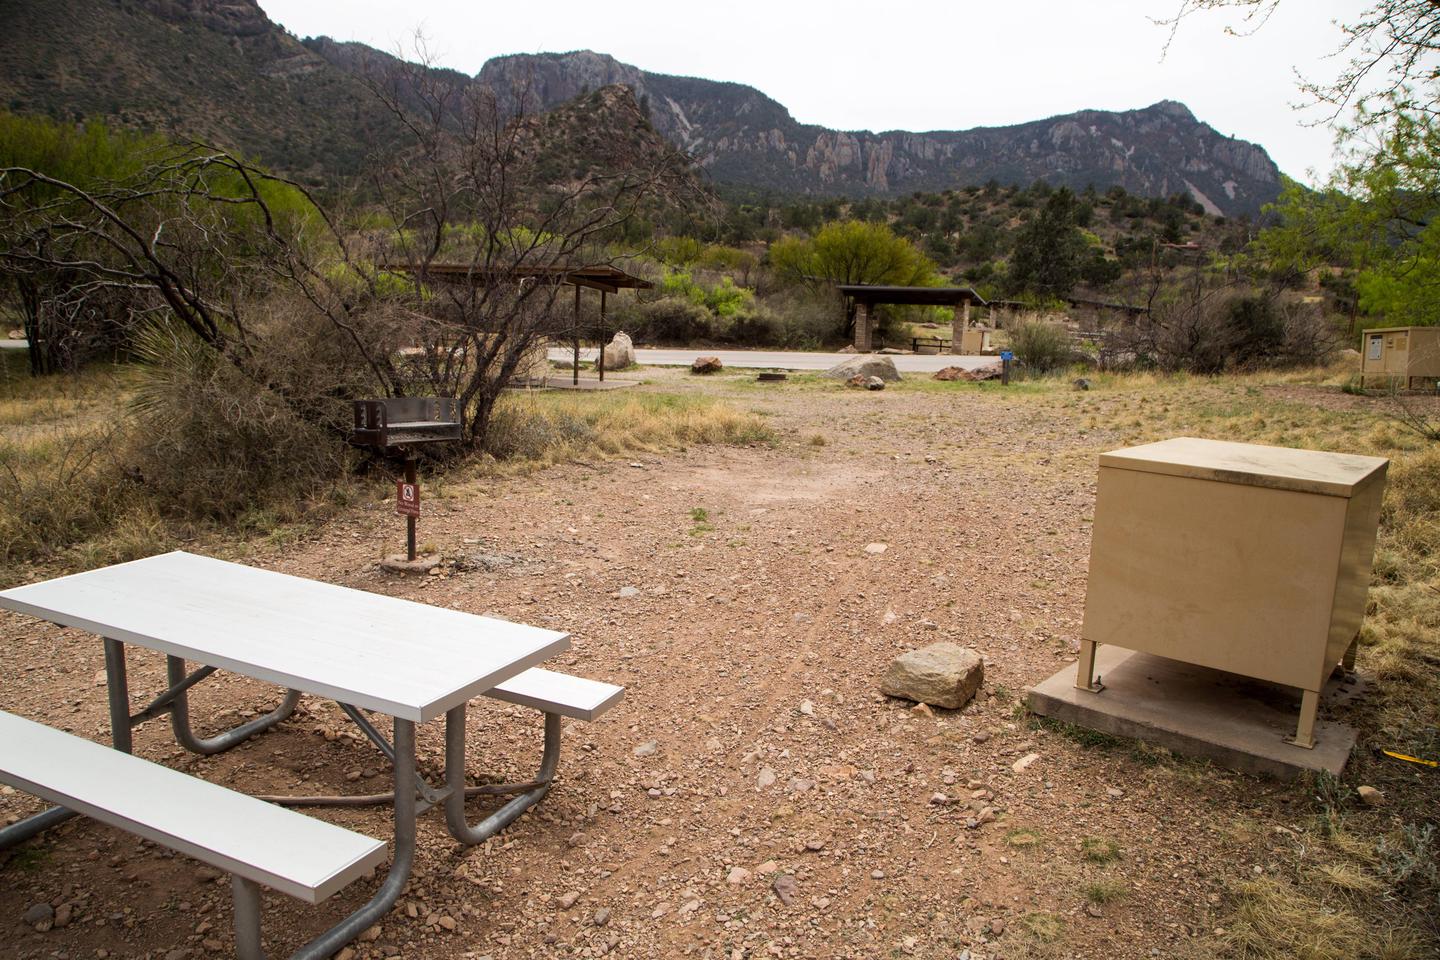 Chisos Basin Campsite #34 oblique viewView showing picnic table, grill, tent pad, and bear box.